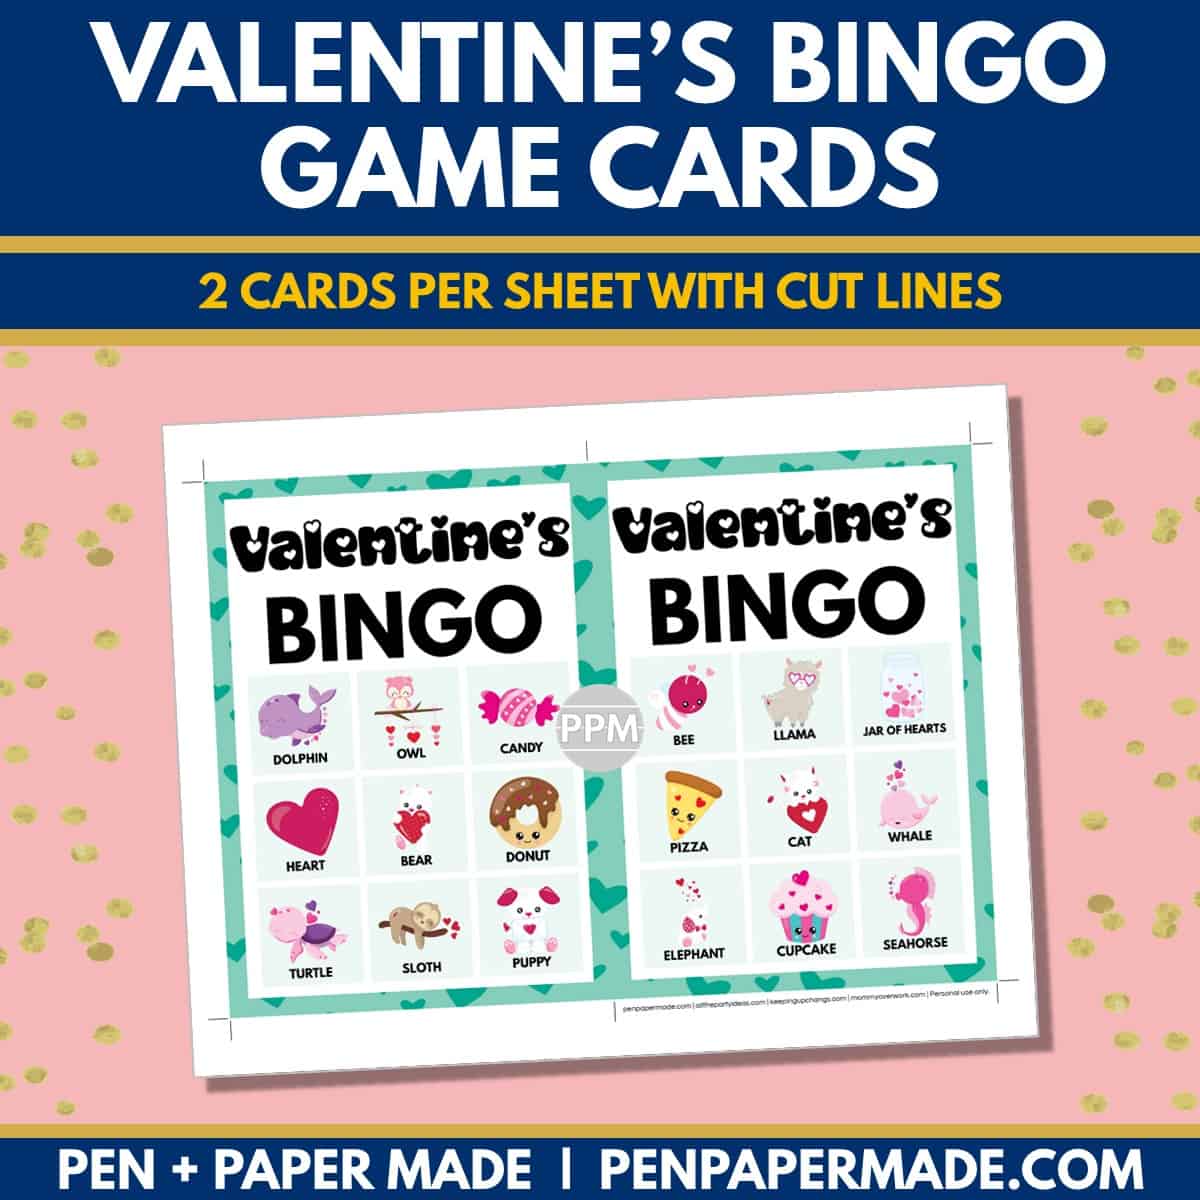 valentine's day bingo card 3x3 5x7 game boards with images and text words.